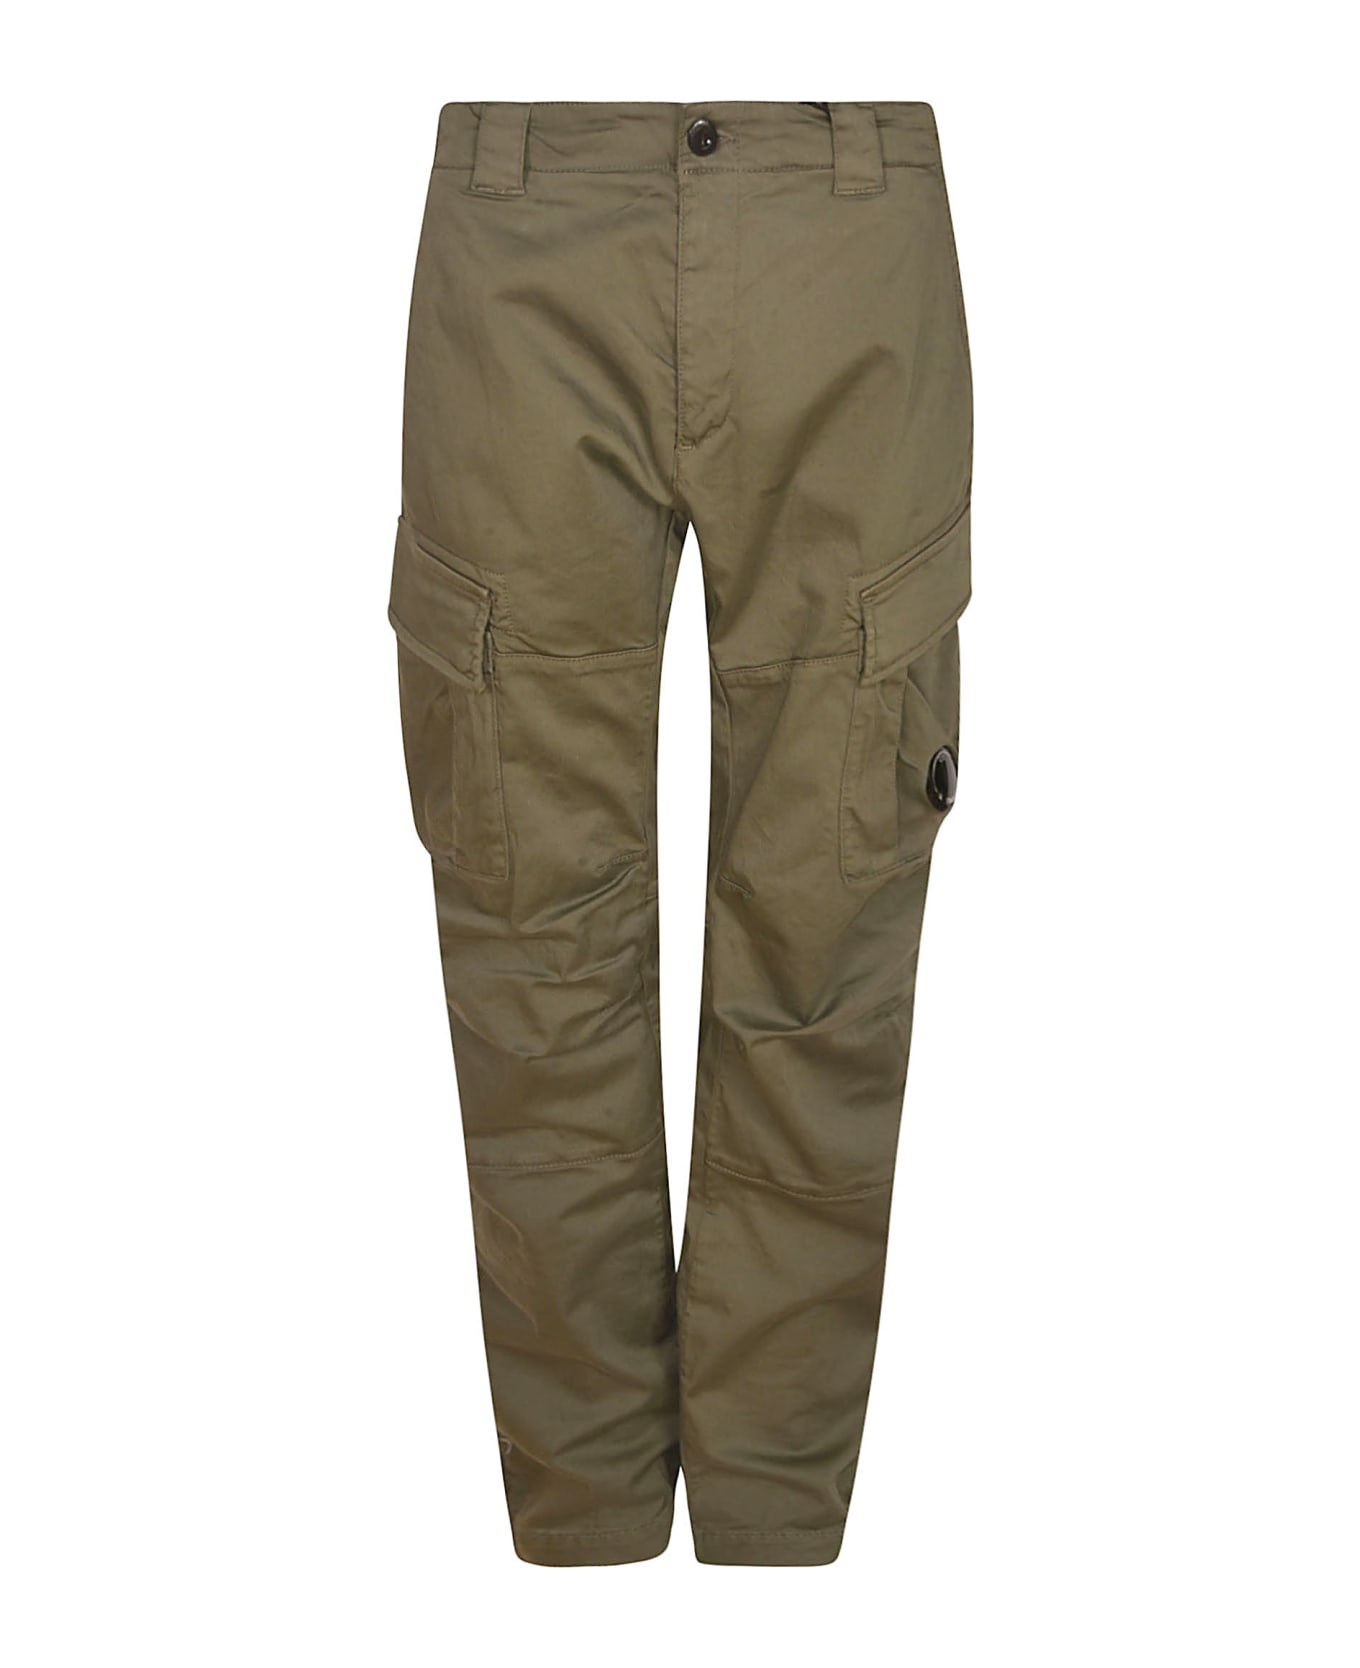 C.P. Company Cargo Long Trousers - Agave